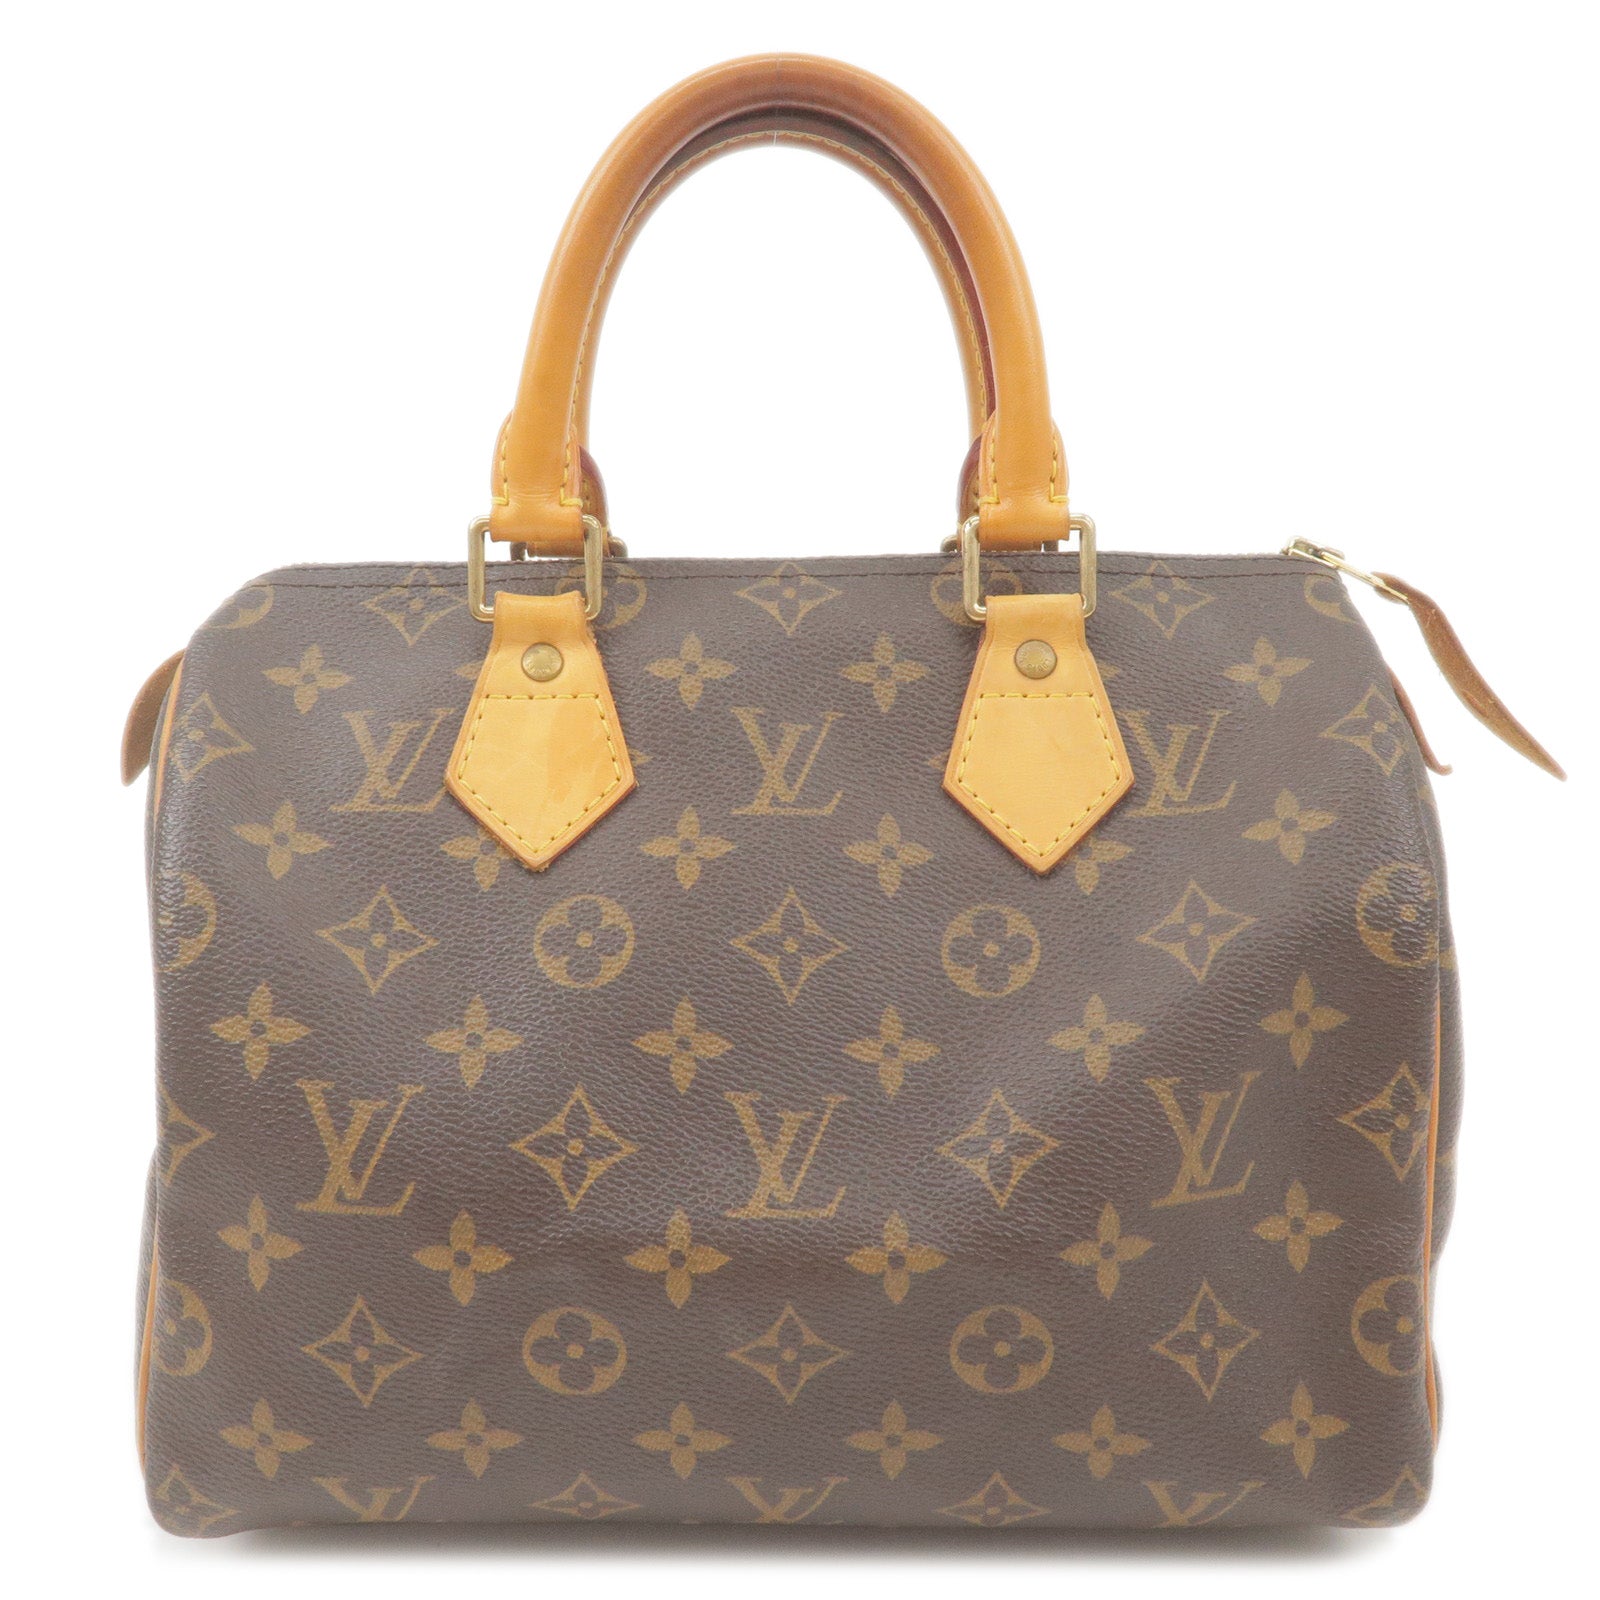 Louis Vuitton, Bags, Two Day Sale Gently Used Lv Speedy 3